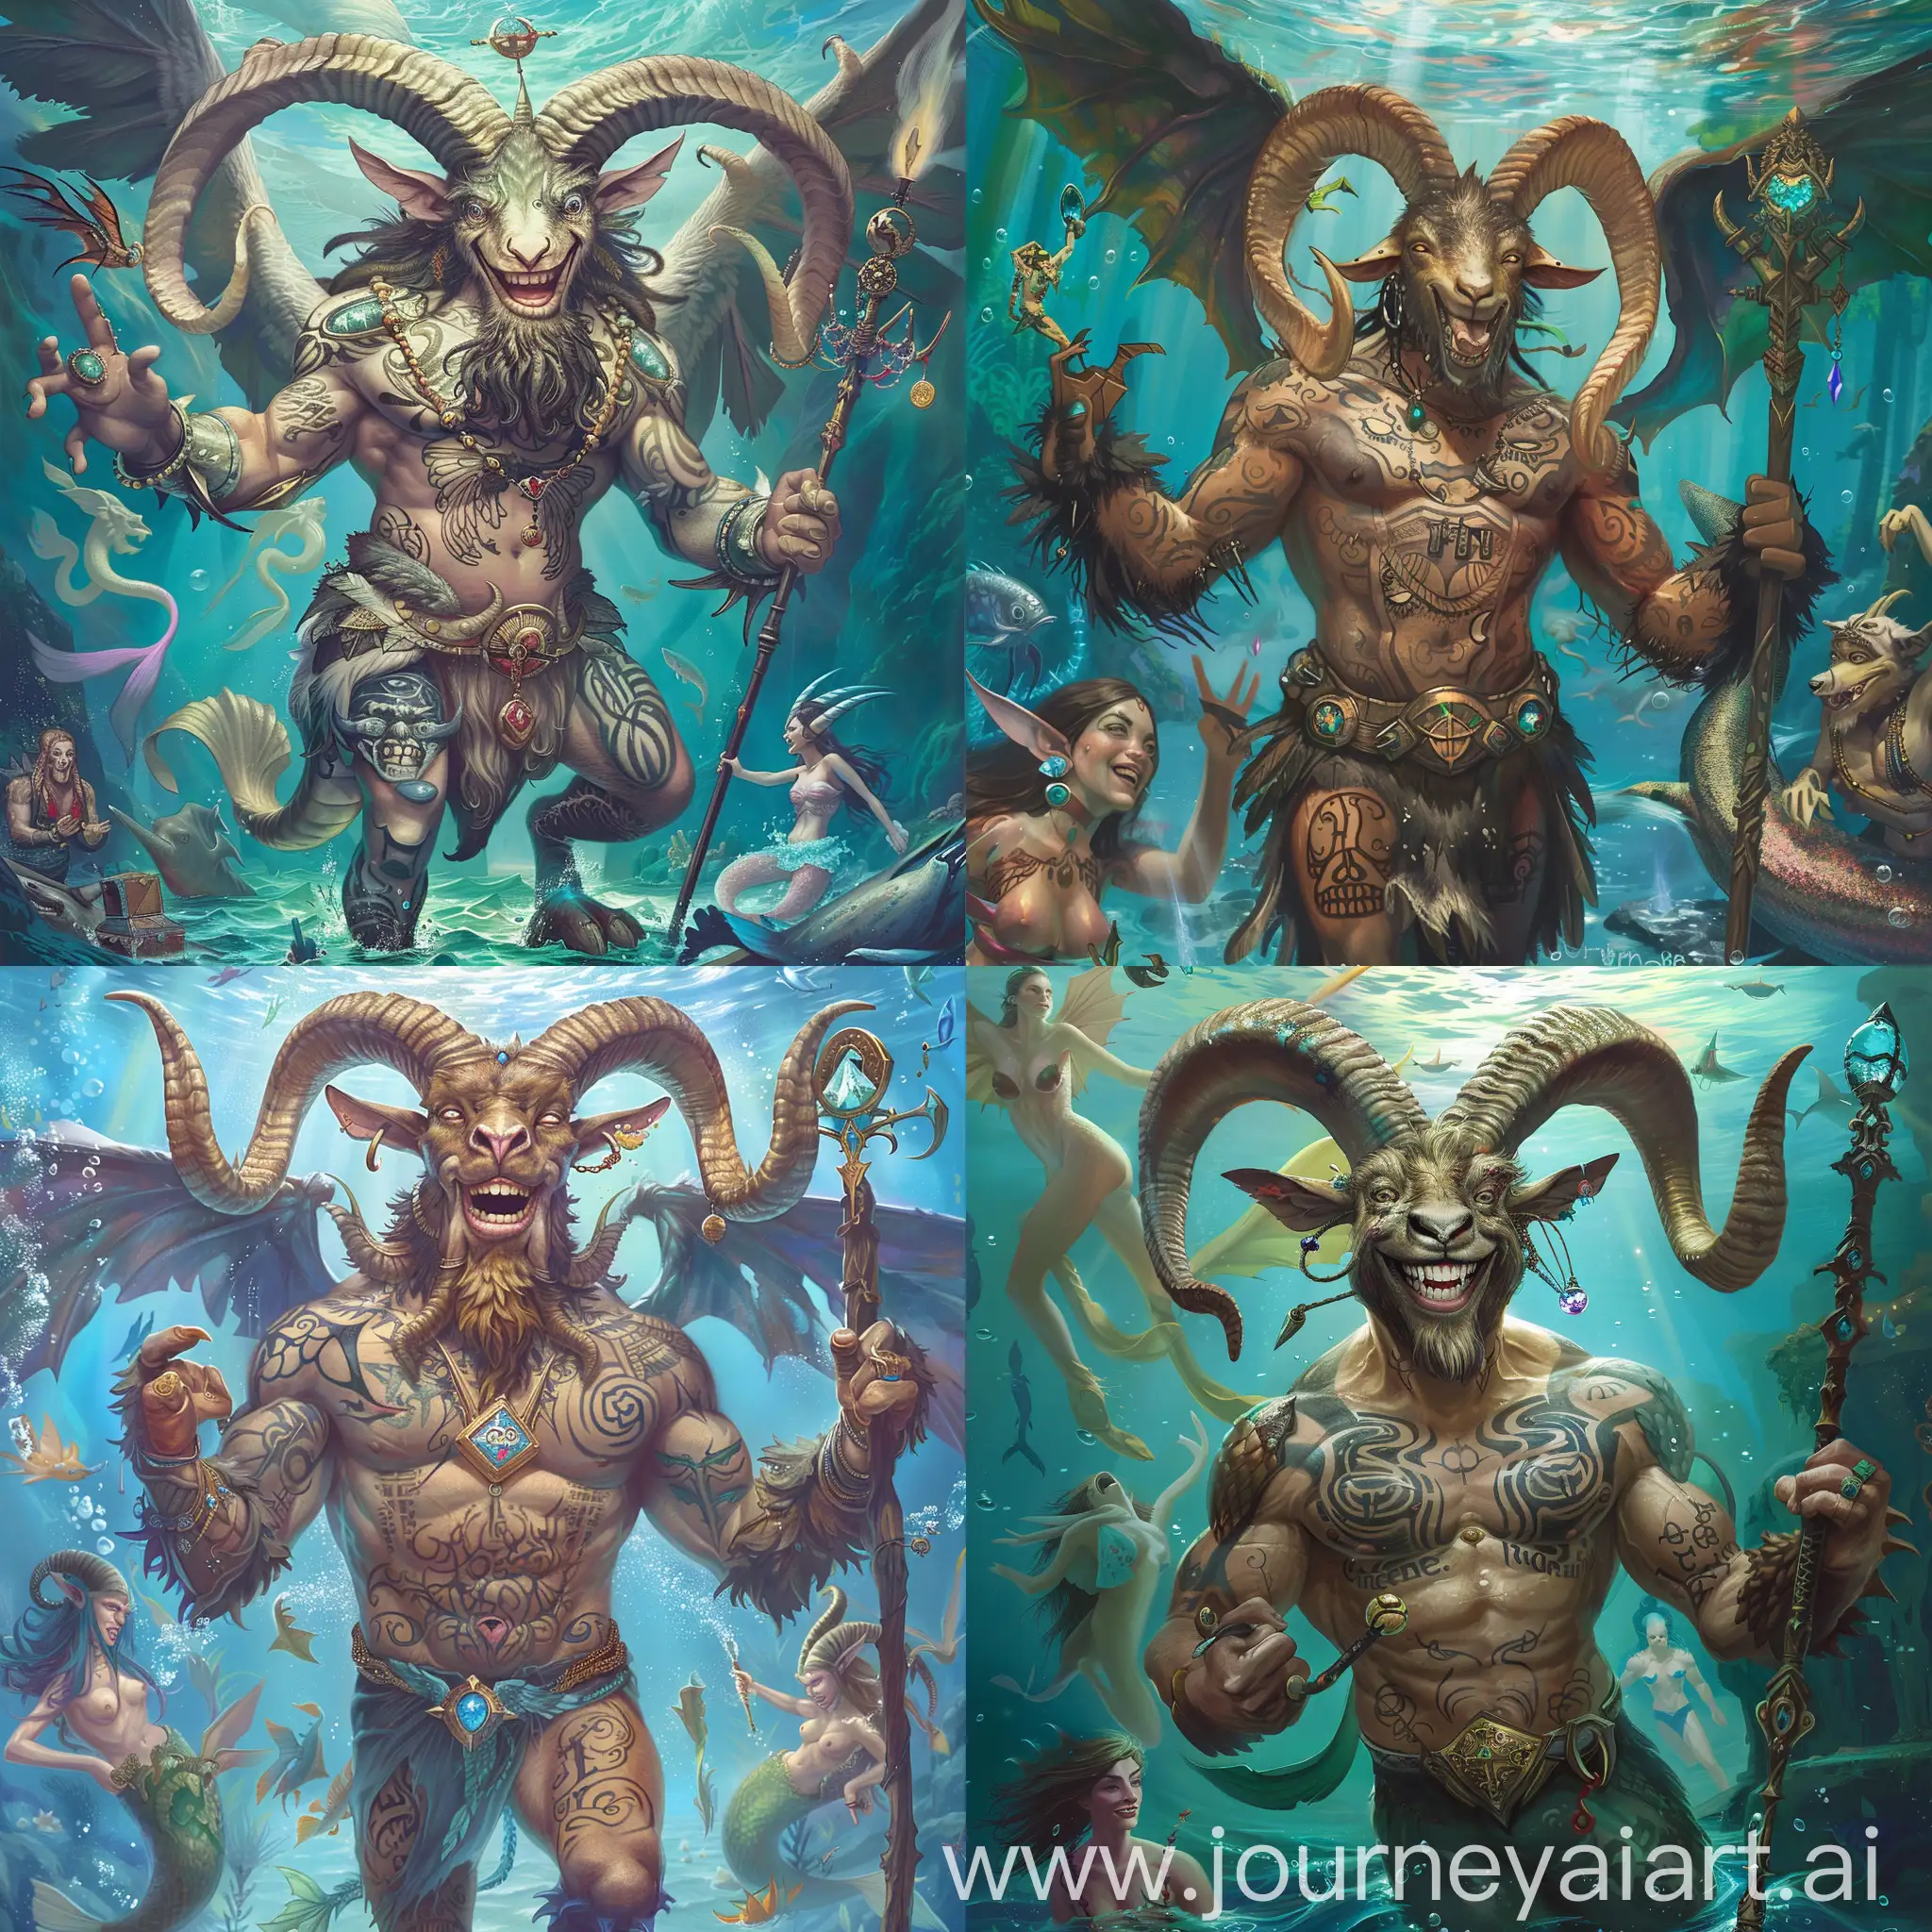 capricorn fantasy art, half goat, large goat head with a muscular like body armour, and strong front hooves, bottom half  of his chest covered in tattoos that look body looks like a water dragon w a long curled tail , wide wicked wings sprouting from its back, a big smile, and mean predator like eyes, very large horns,, furry ears,, fit, lifelike, charming, devious, doesn look like a man , looks like half goat half water dragon with wings and a big goat head smiling, resembles a wizard with magical powers, holding a long staff with a gem on top, halef in clear blue water surrounded by mermaids and treasure
 

